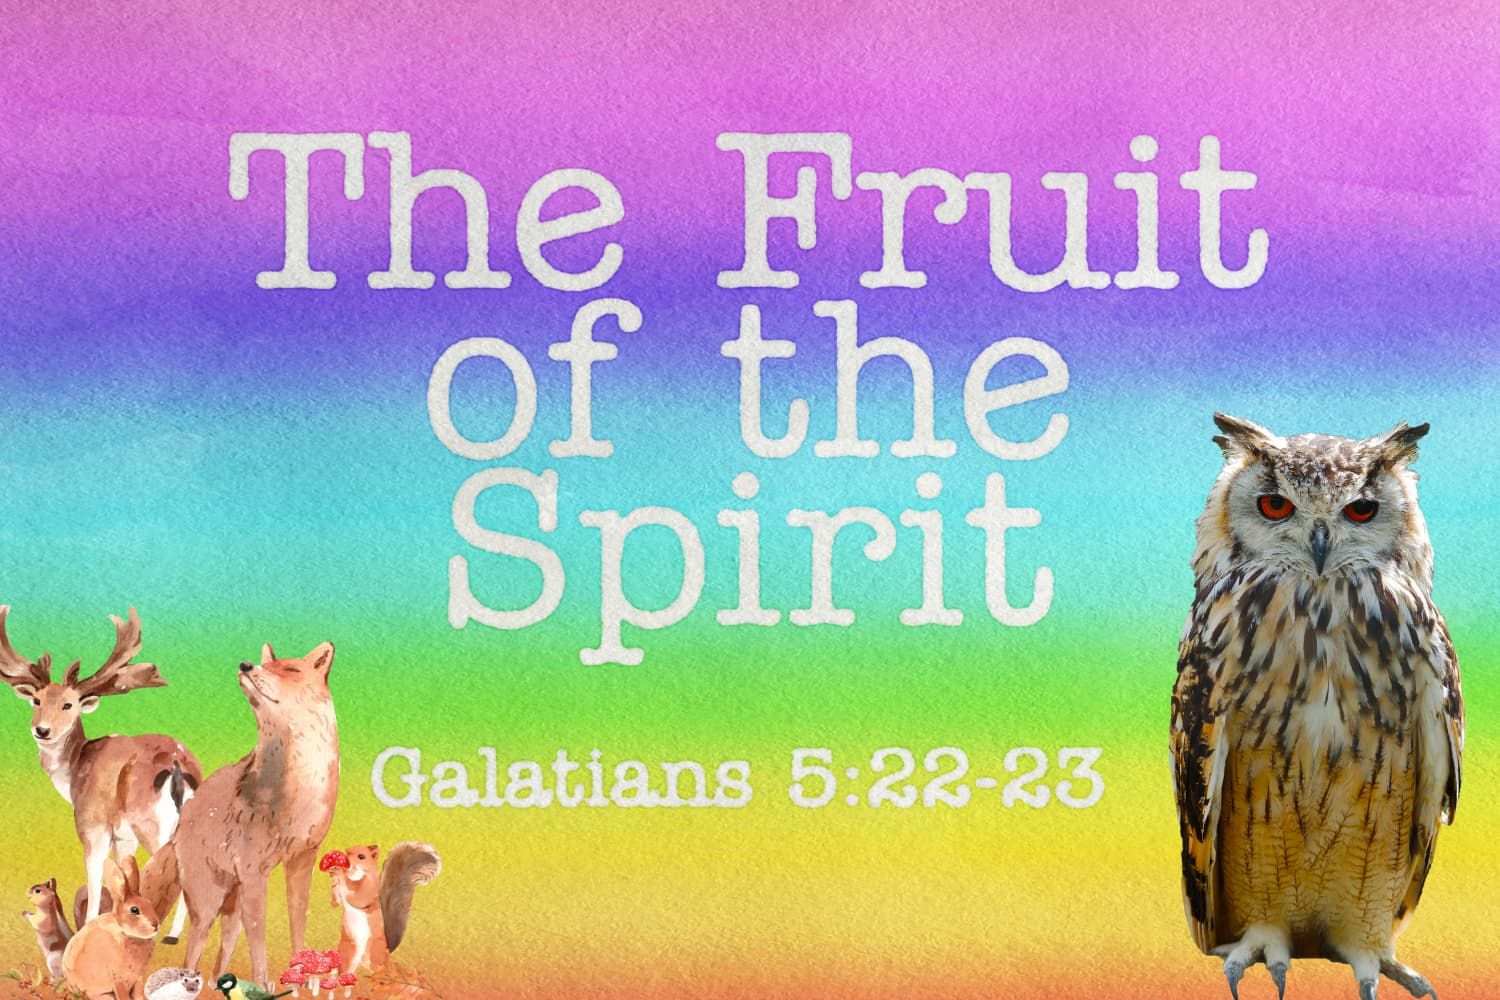 Parable%20-%20Wise%20owl%20and%20fruit%20of%20the%20spirit-d9417540 Bible stories